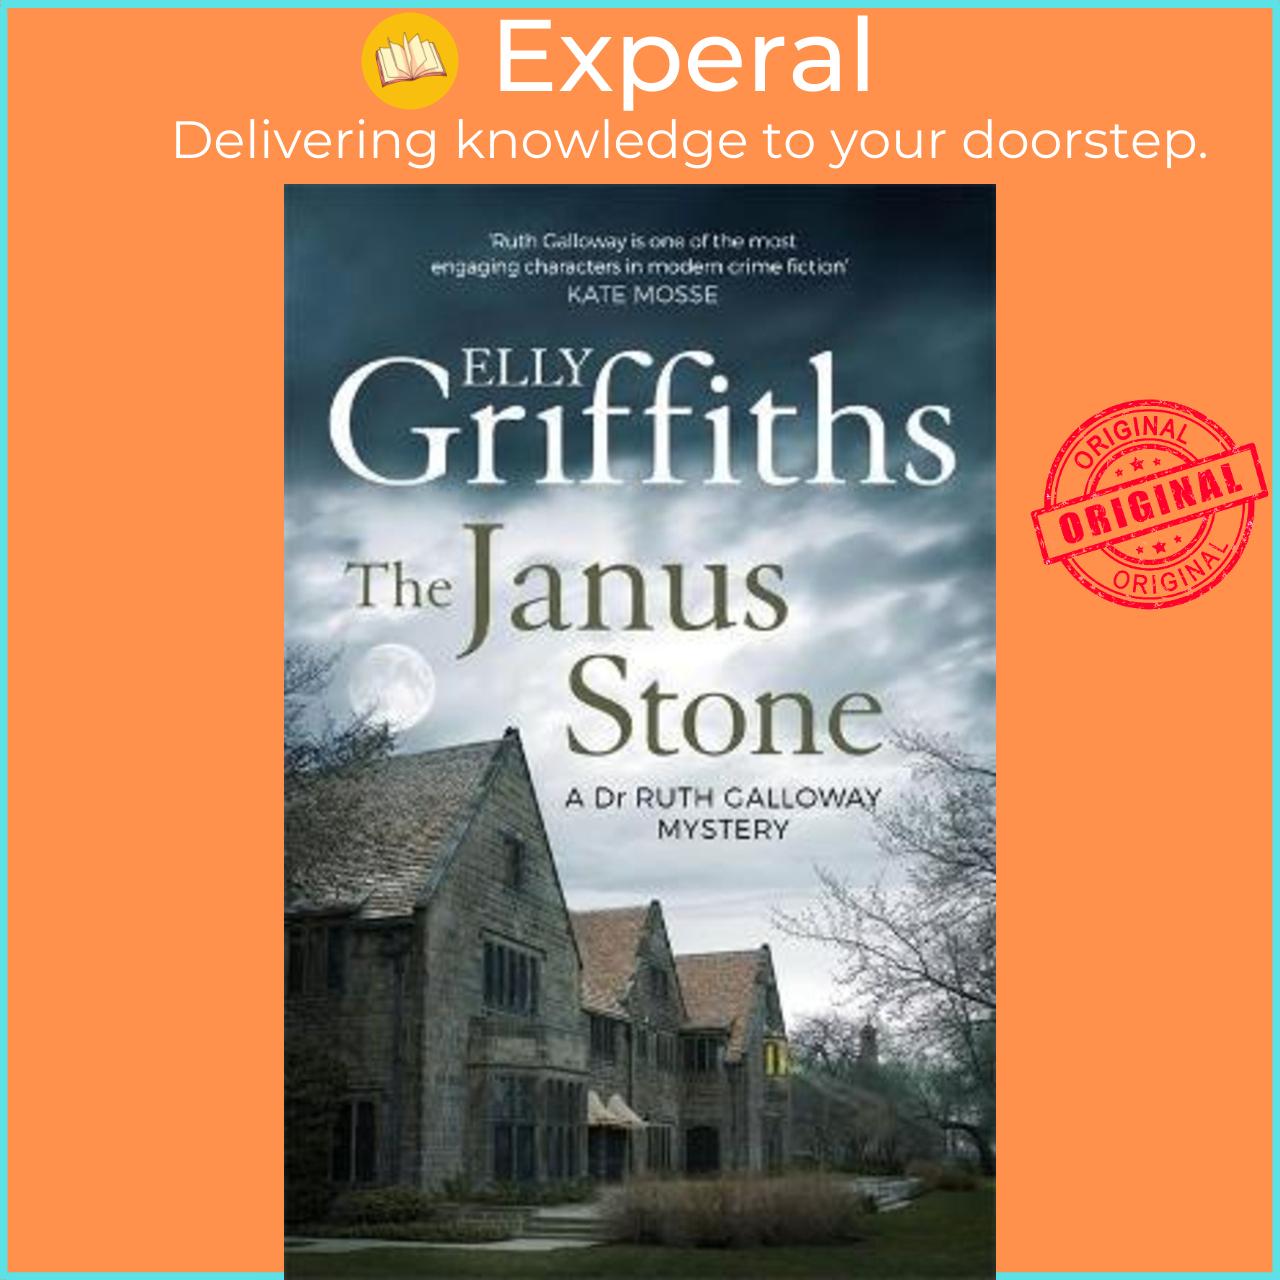 Sách - The Janus Stone : The Dr Ruth Galloway Mysteries 2 by Elly Griffiths (UK edition, paperback)